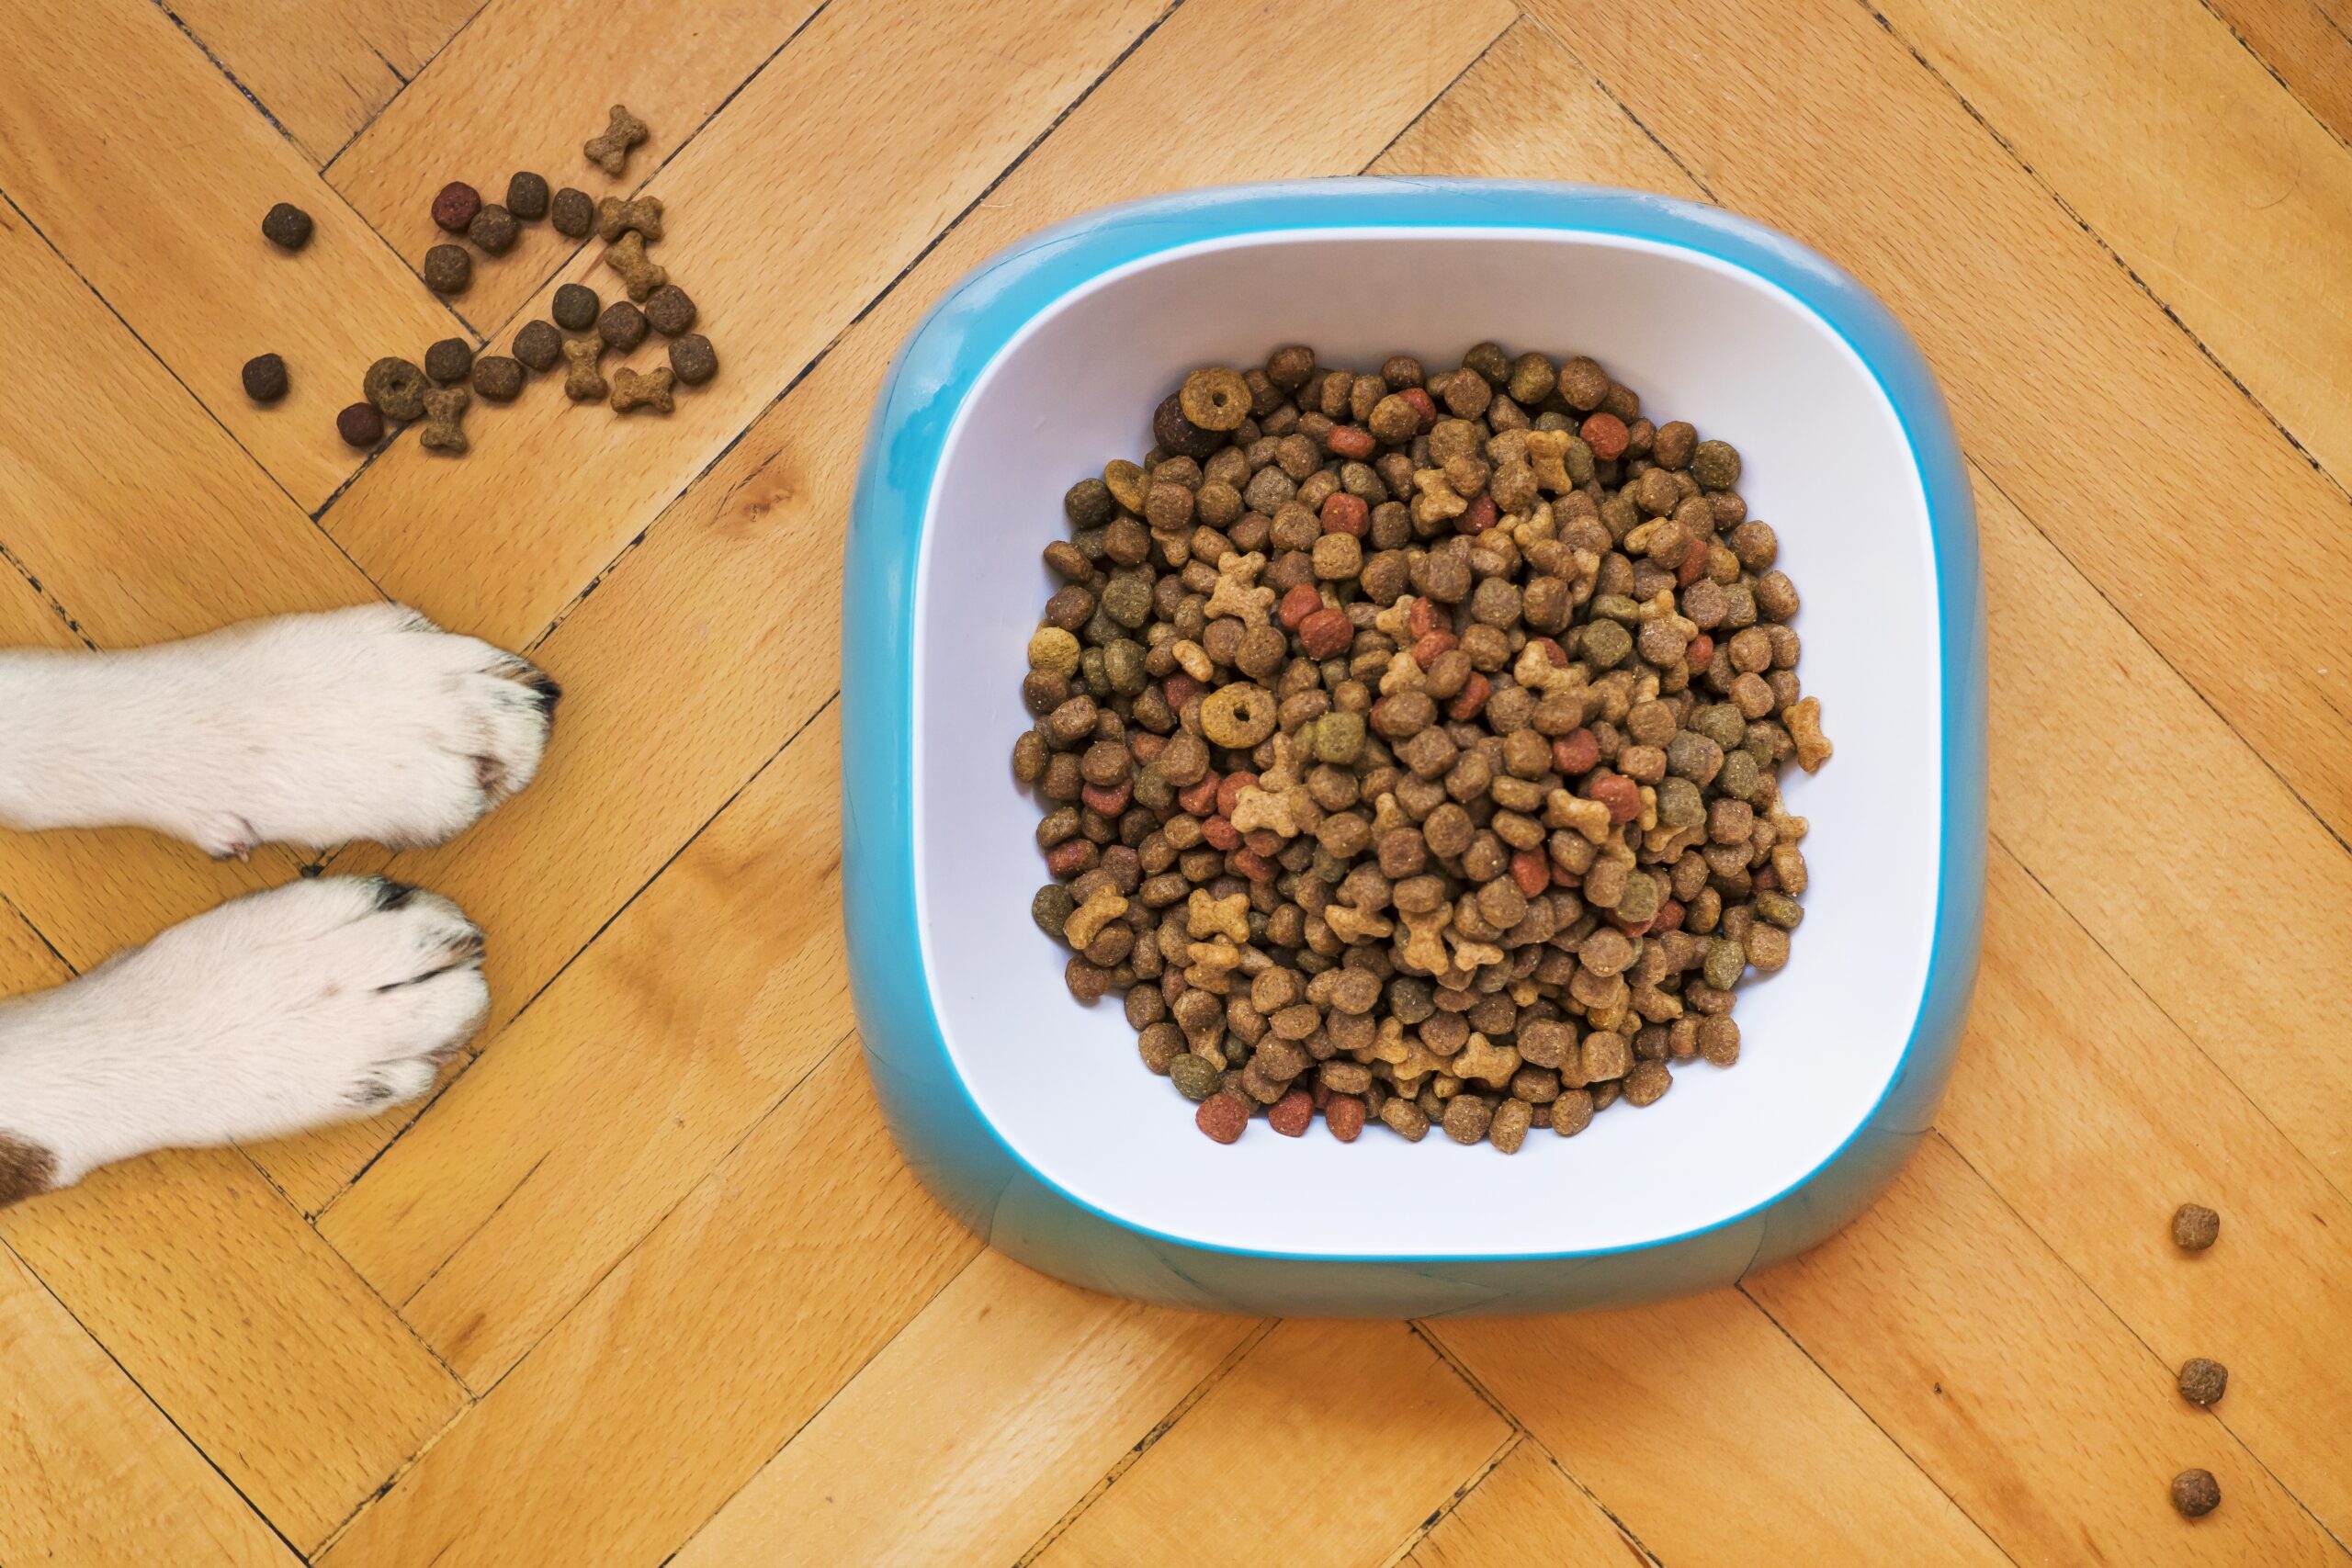 Which is safer, wet or dry dog food?